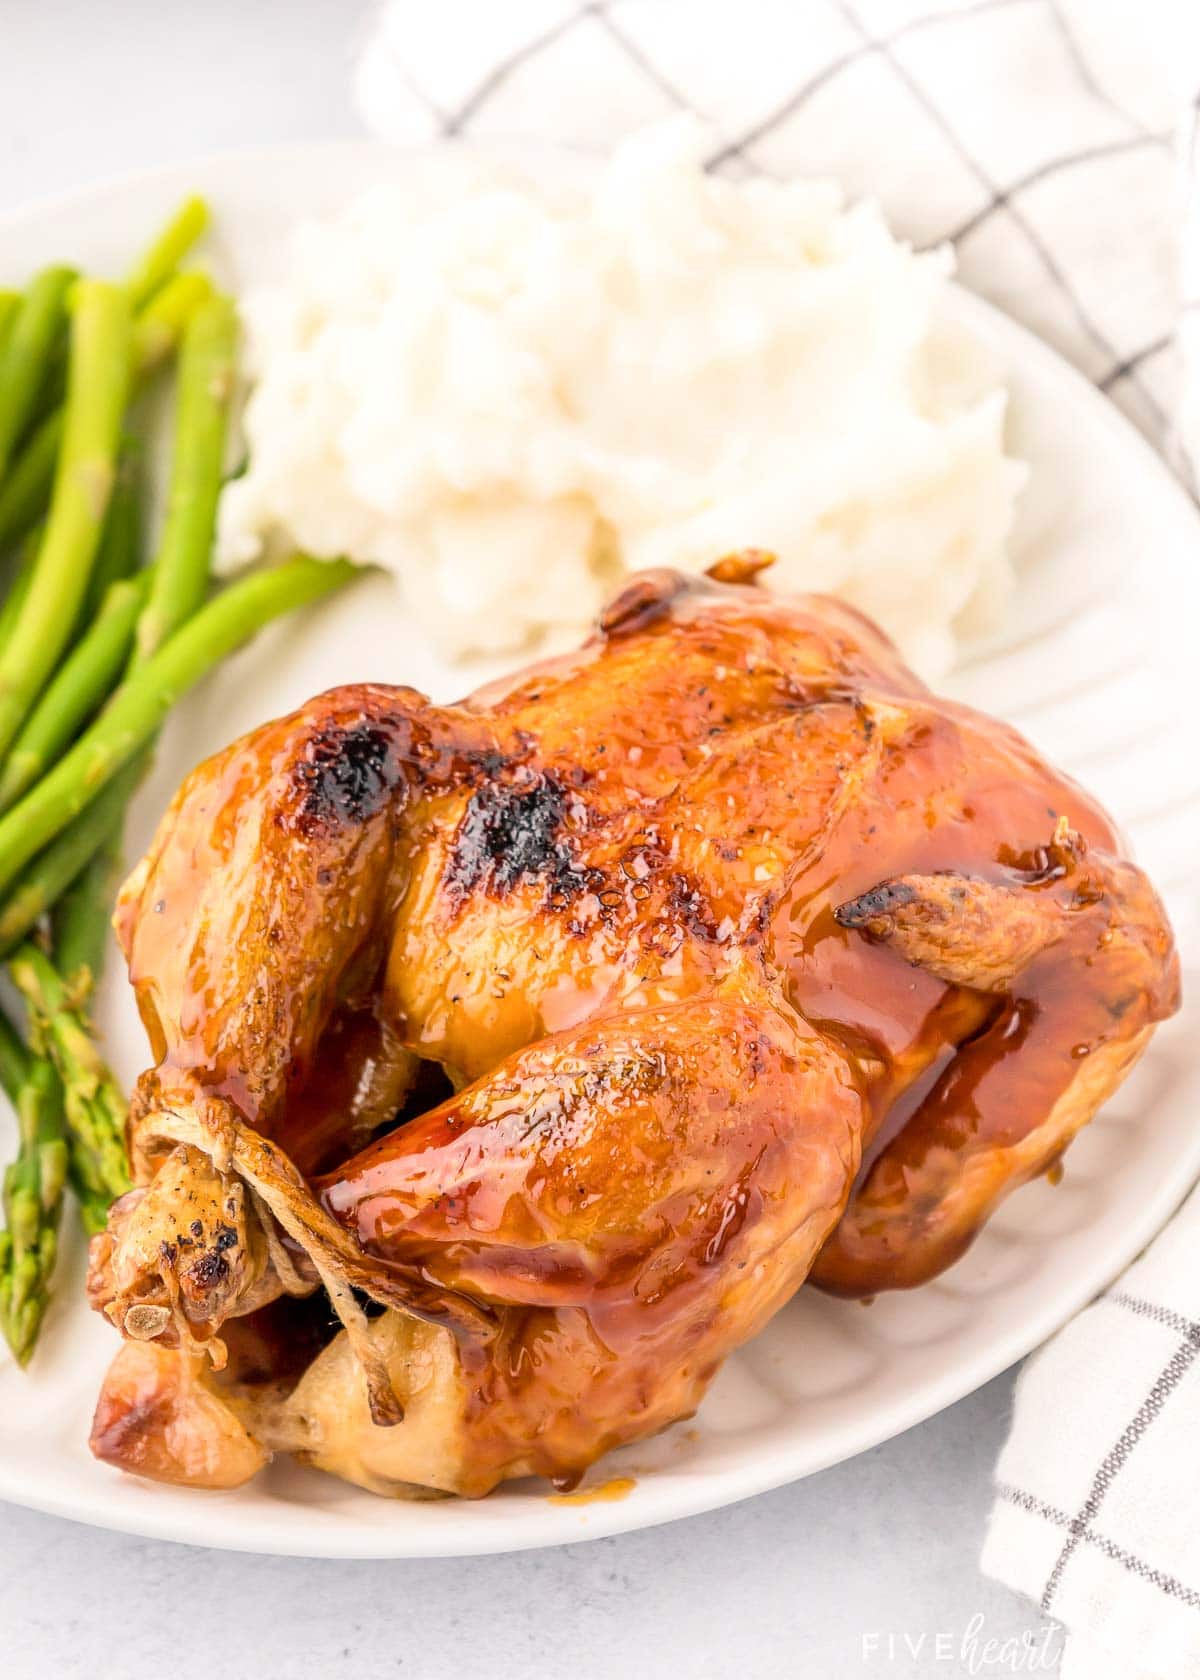 Cornish hen with mashed potatoes and asparagus on plate.